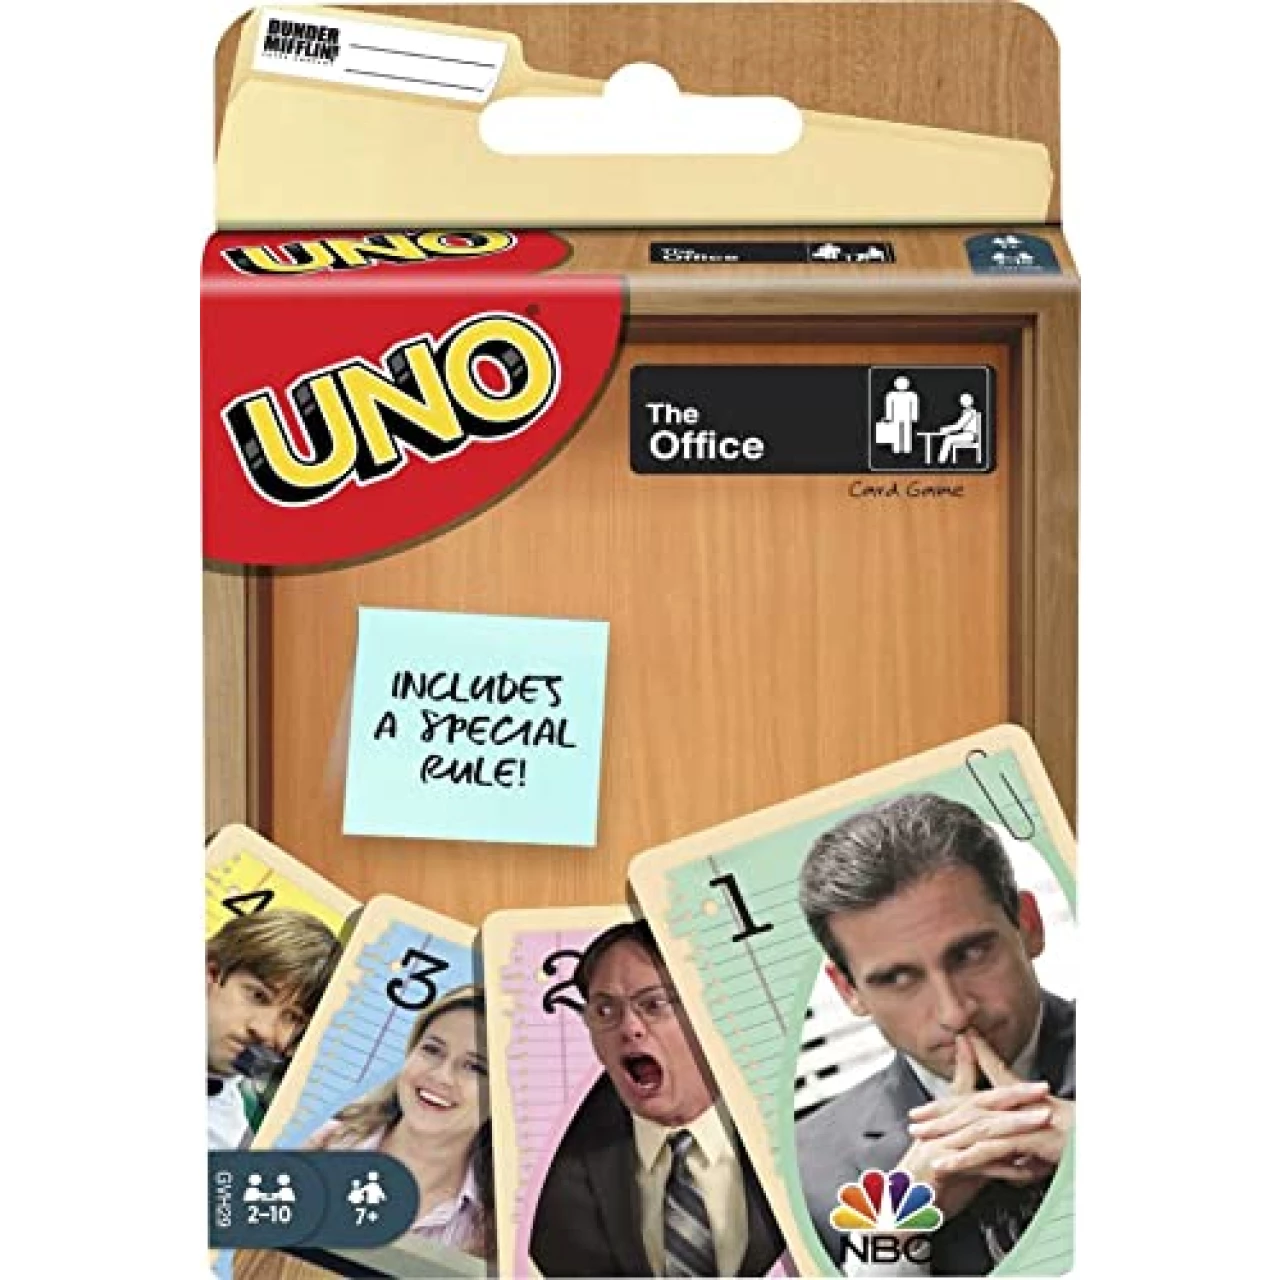 Mattel Games ​UNO The Office Card Game for Teens &amp; Adults for Family or Game Night with Special Rule for 2-10 Players